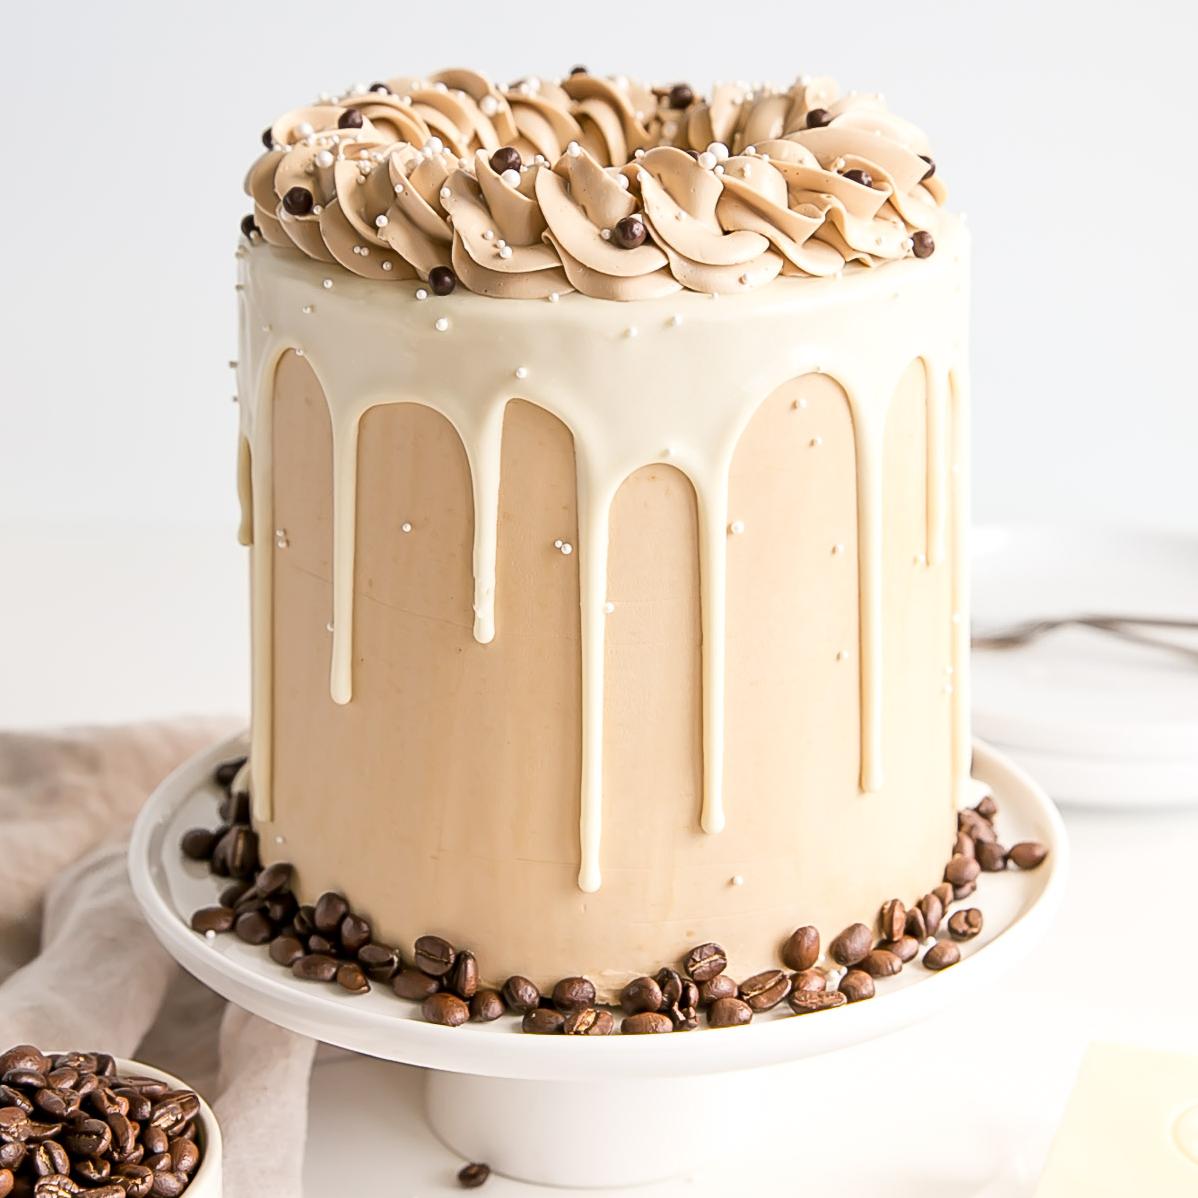  Satisfy your sweet tooth with this mocha cake.